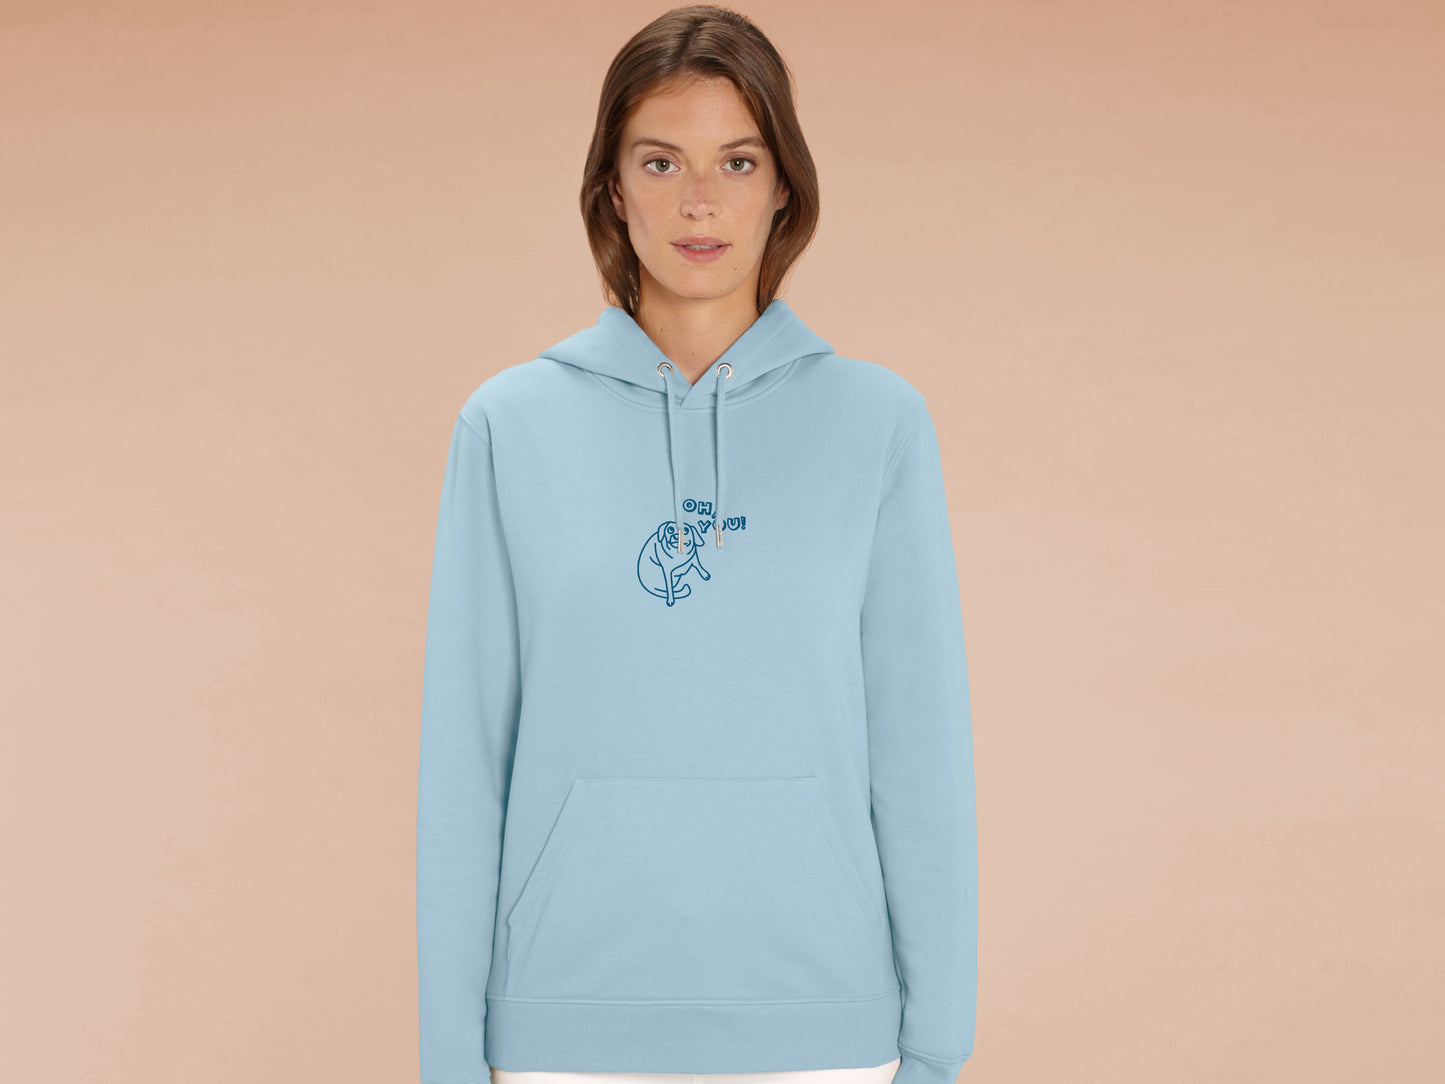 Man wearing a blue long sleeve fleece hoodie, with an embroidered blue thread design of cute meme dog with cheeky expression and big eyes, with the text Oh You!